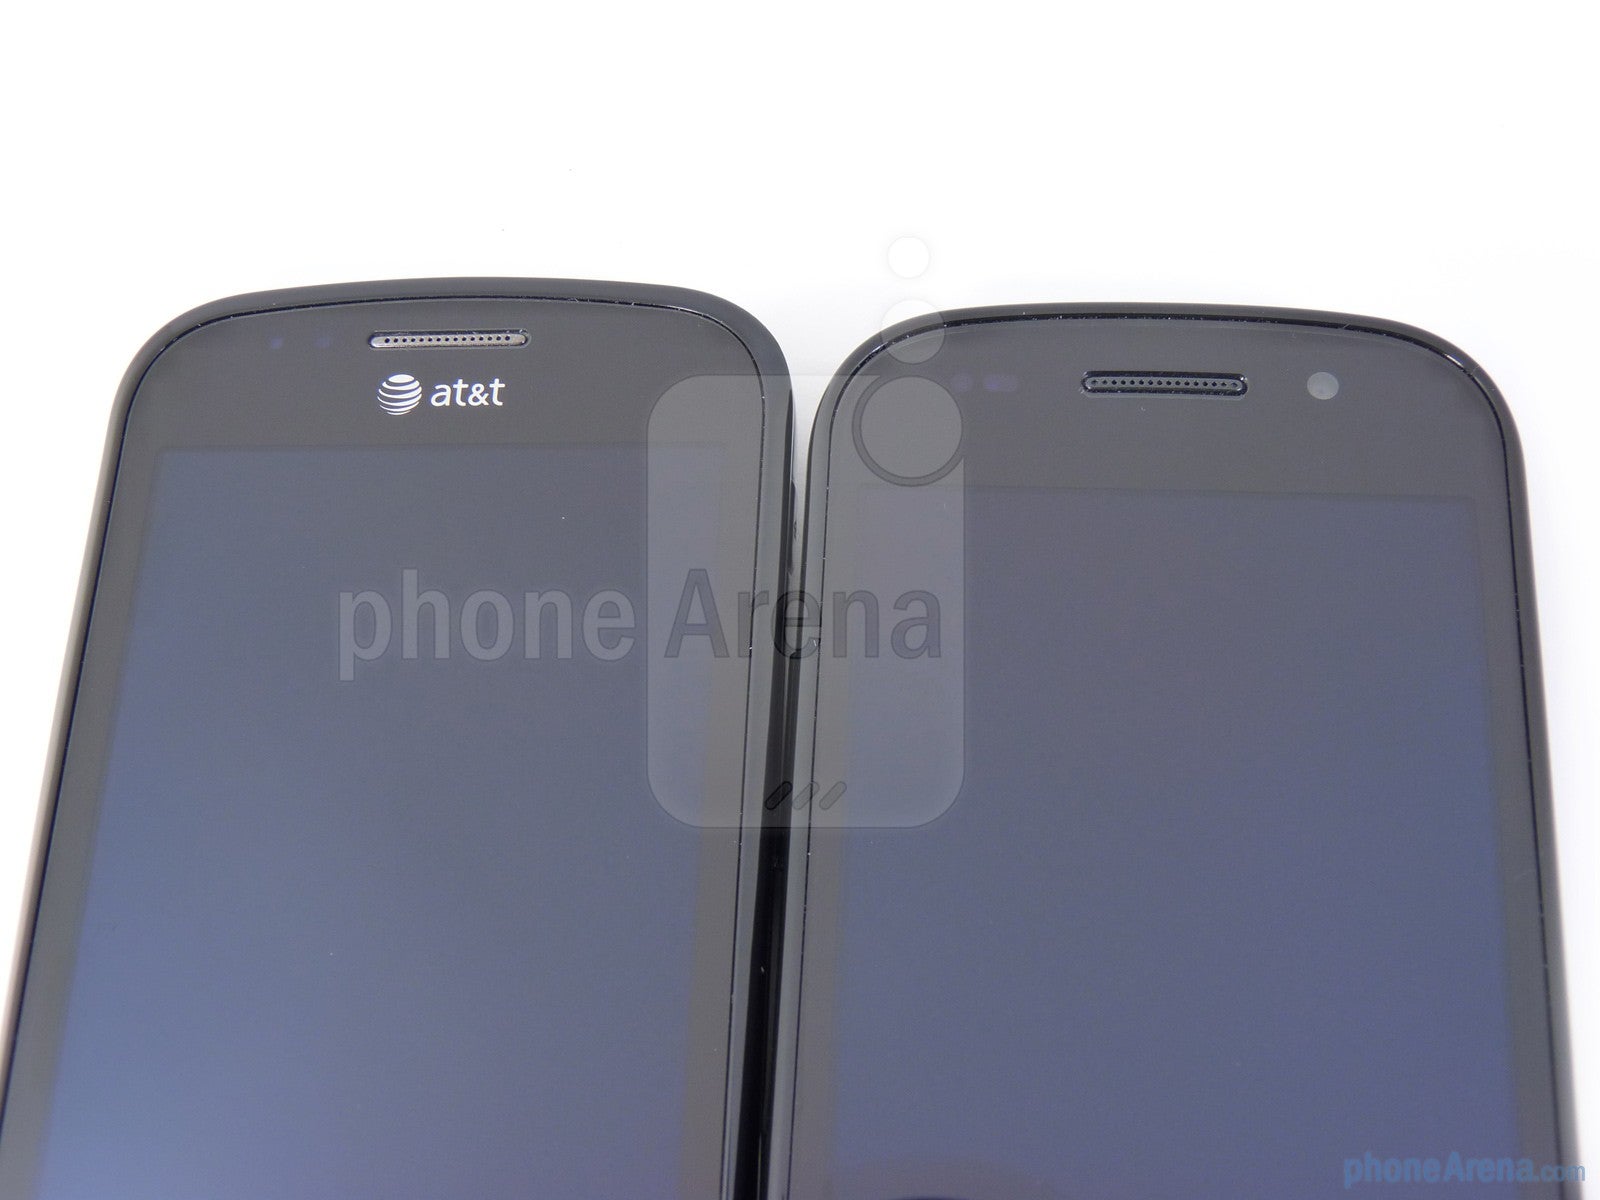 The Samsung Focus (L) and the Google Nexus S (R) - Google Nexus S vs Samsung Focus